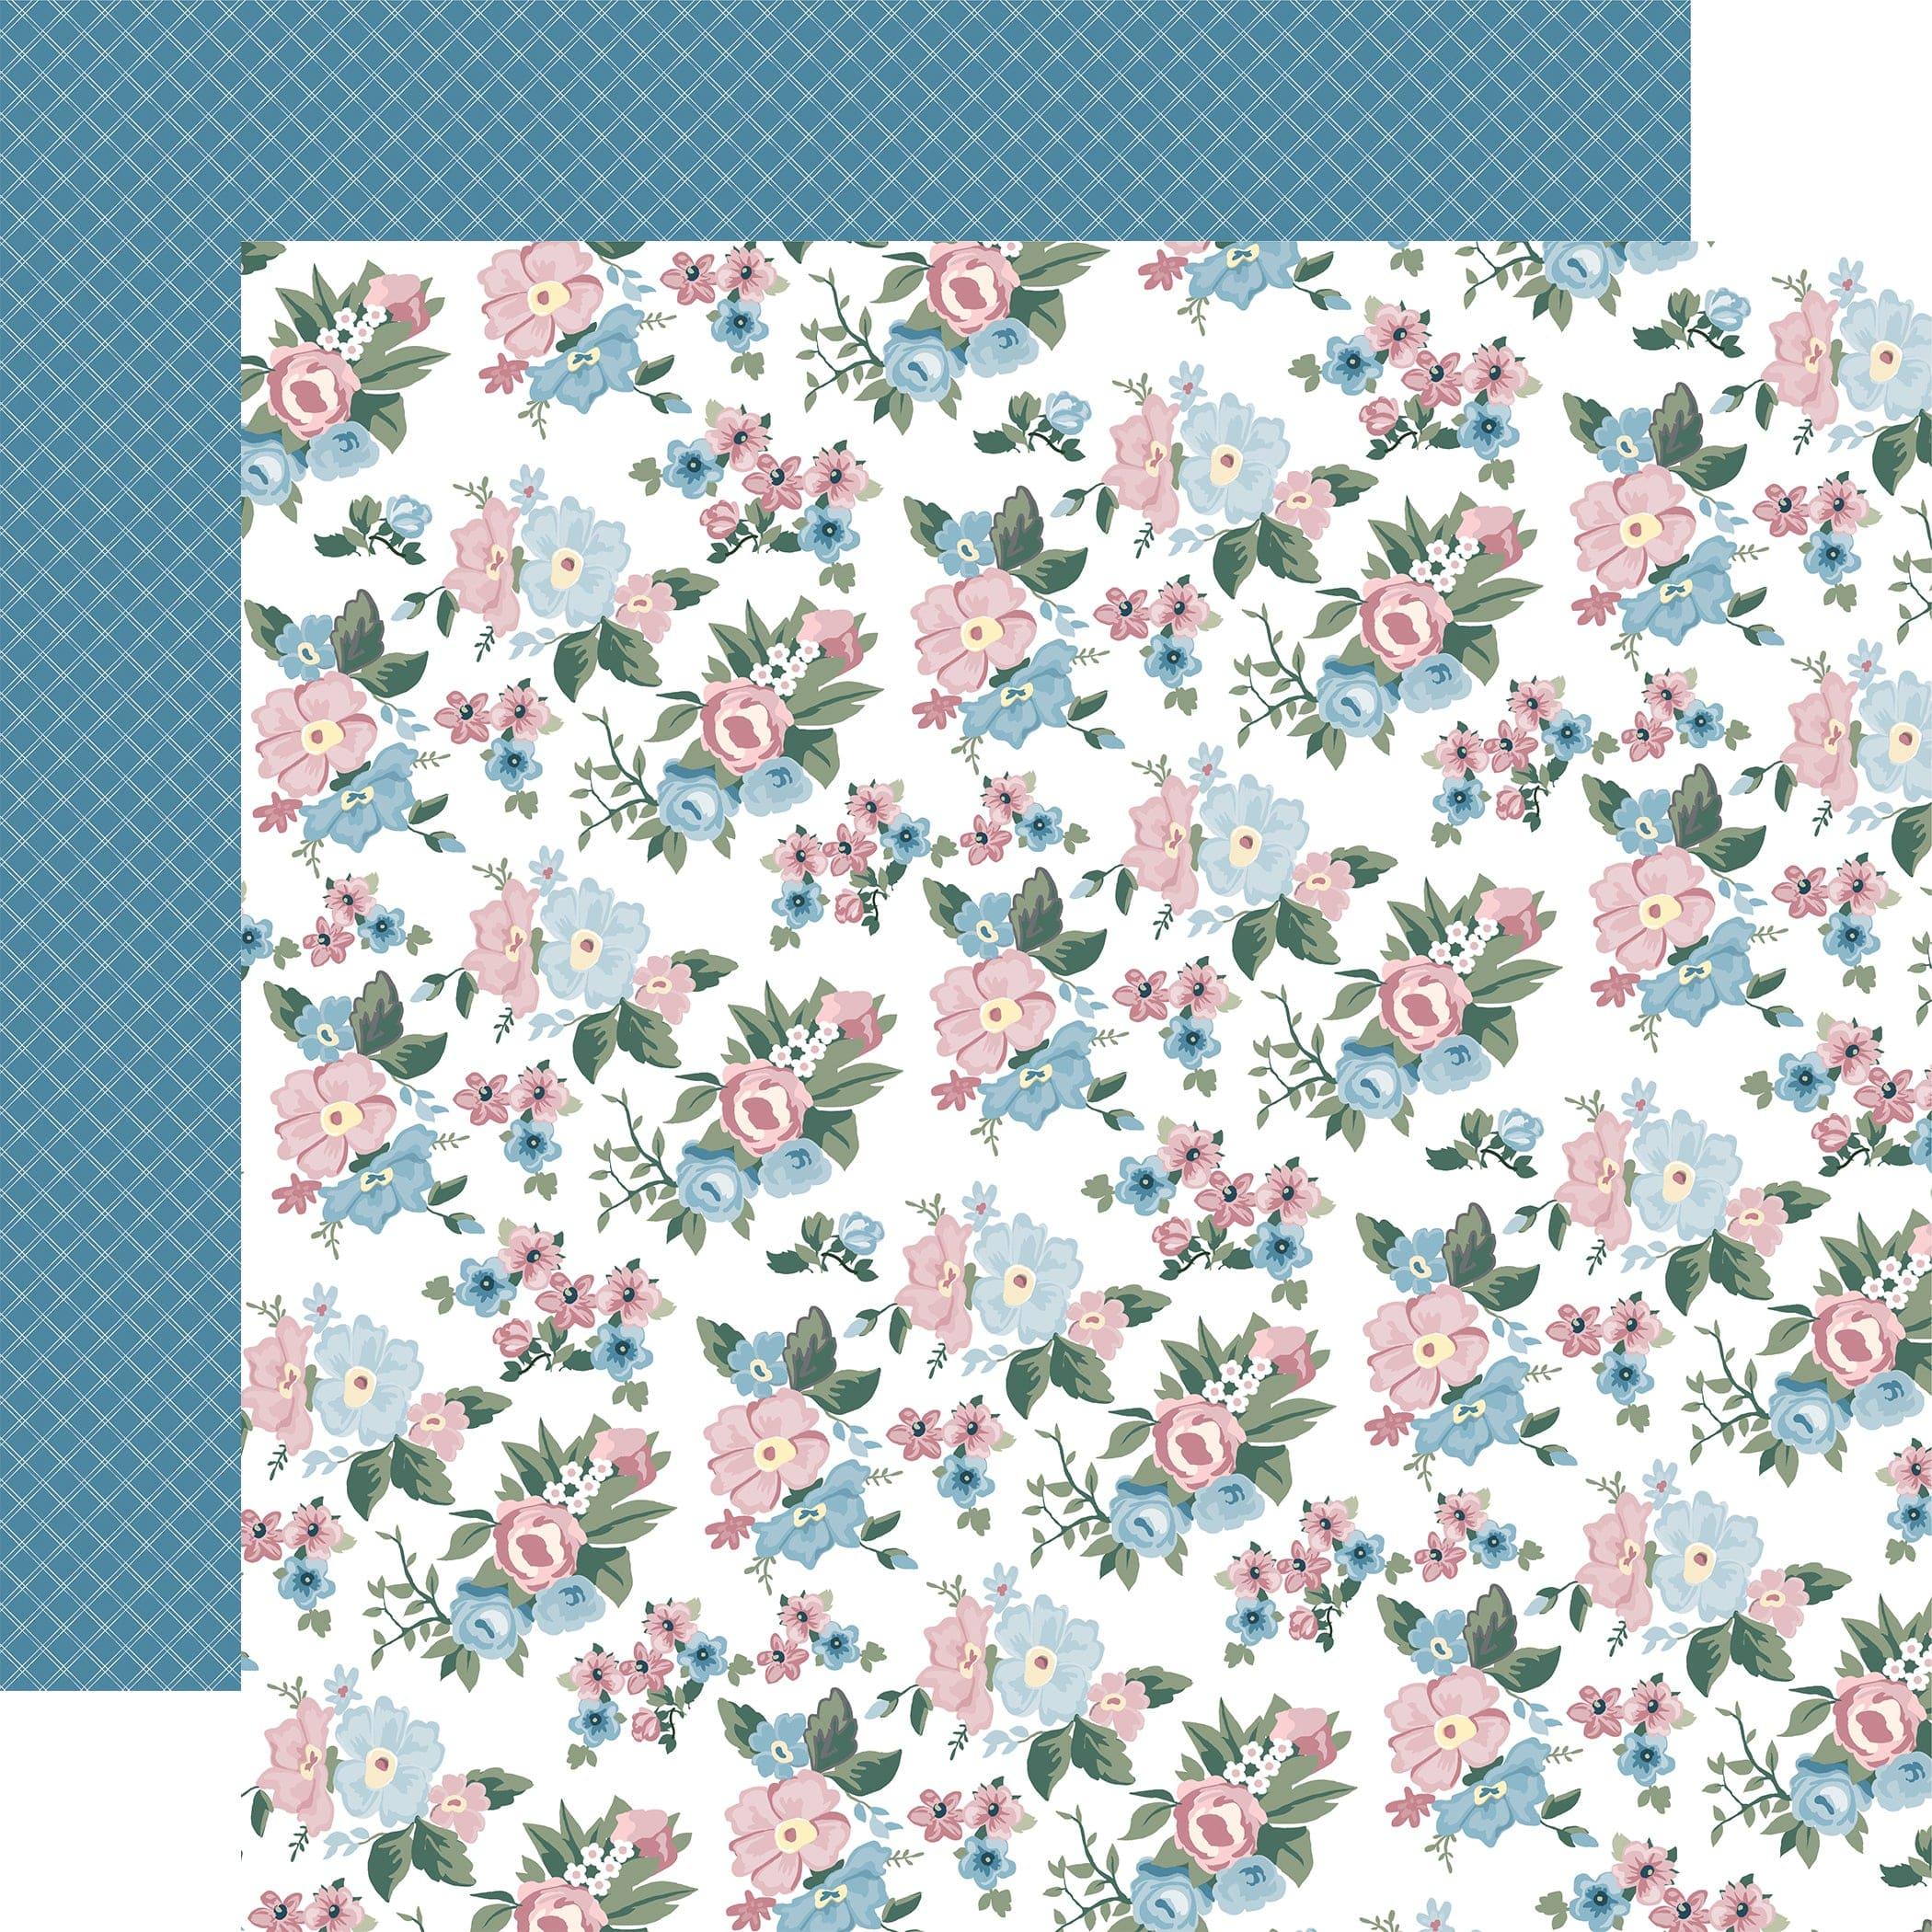 My Favorite Things Collection Favorite Things Floral 12 x 12 Double-Sided Scrapbook Paper by Carta Bella